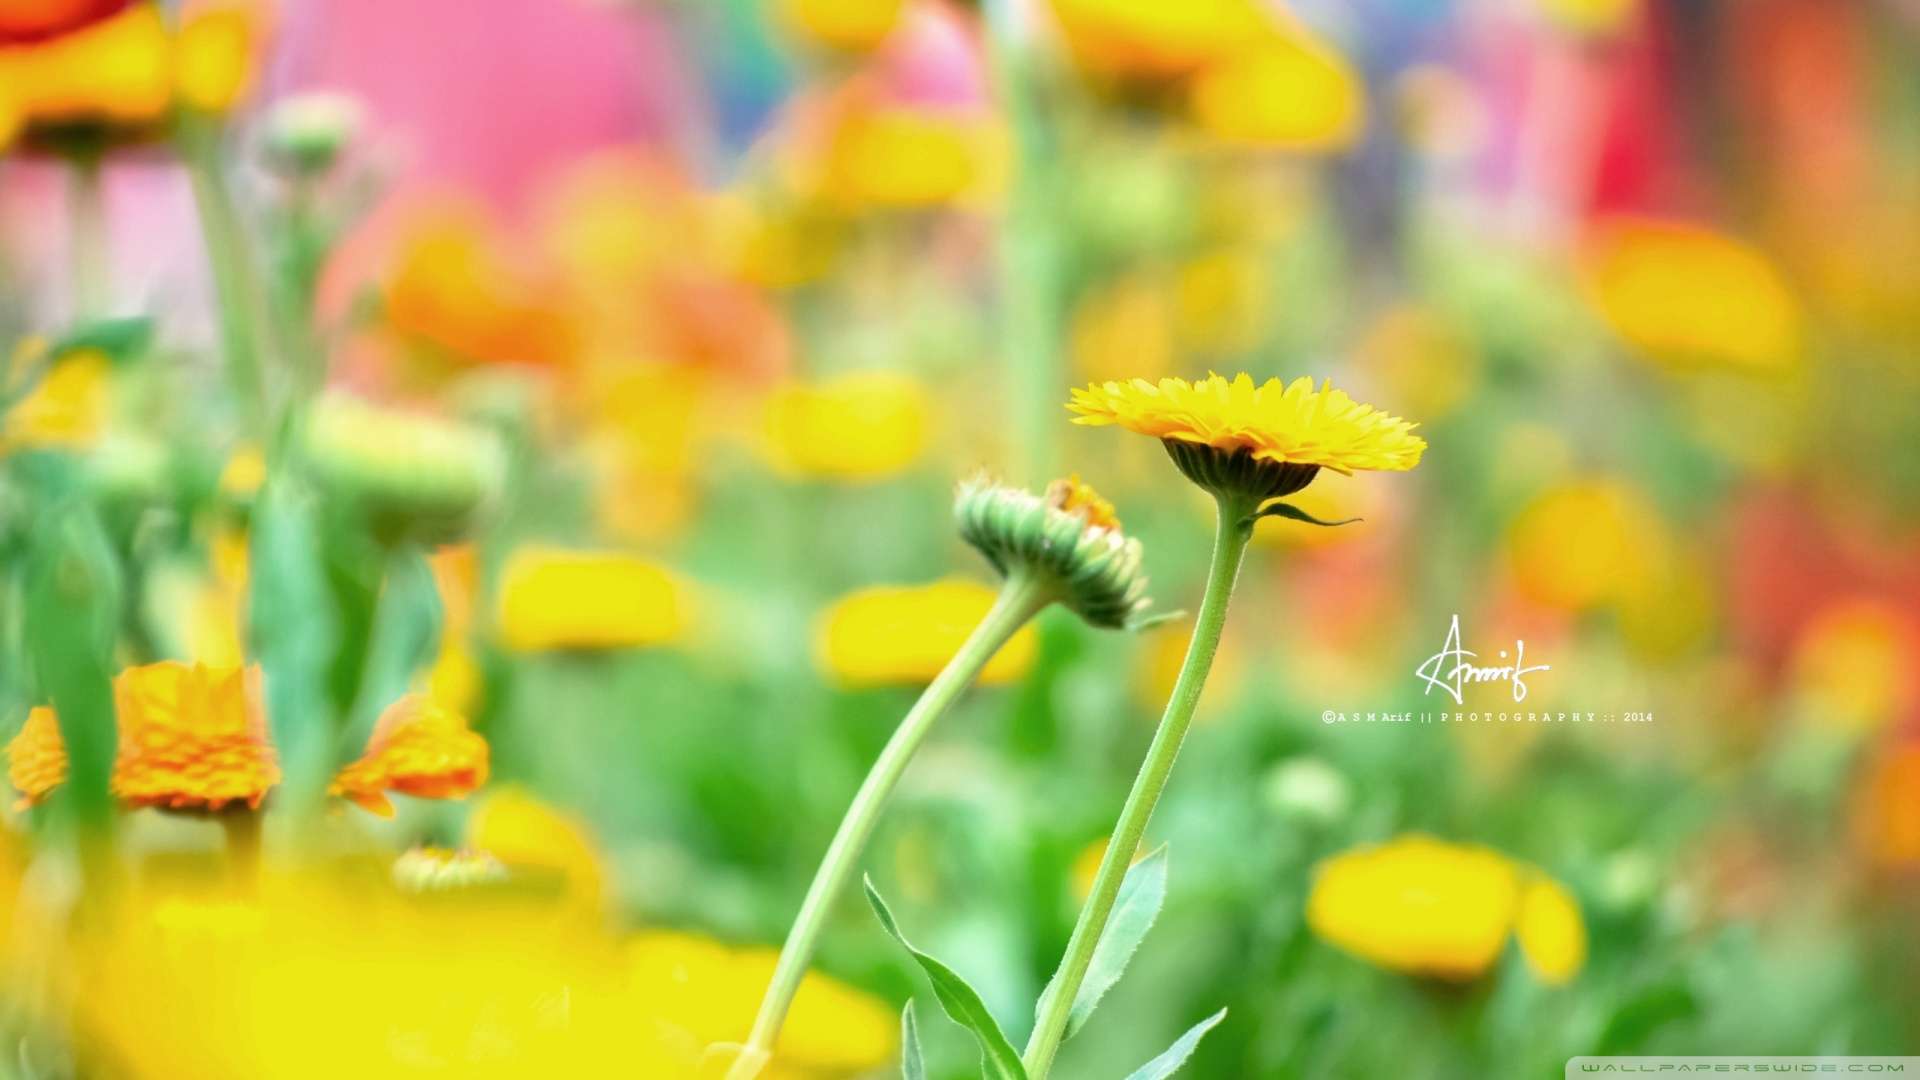 Wallpaper Yellow Flower 1080p HD Upload At February